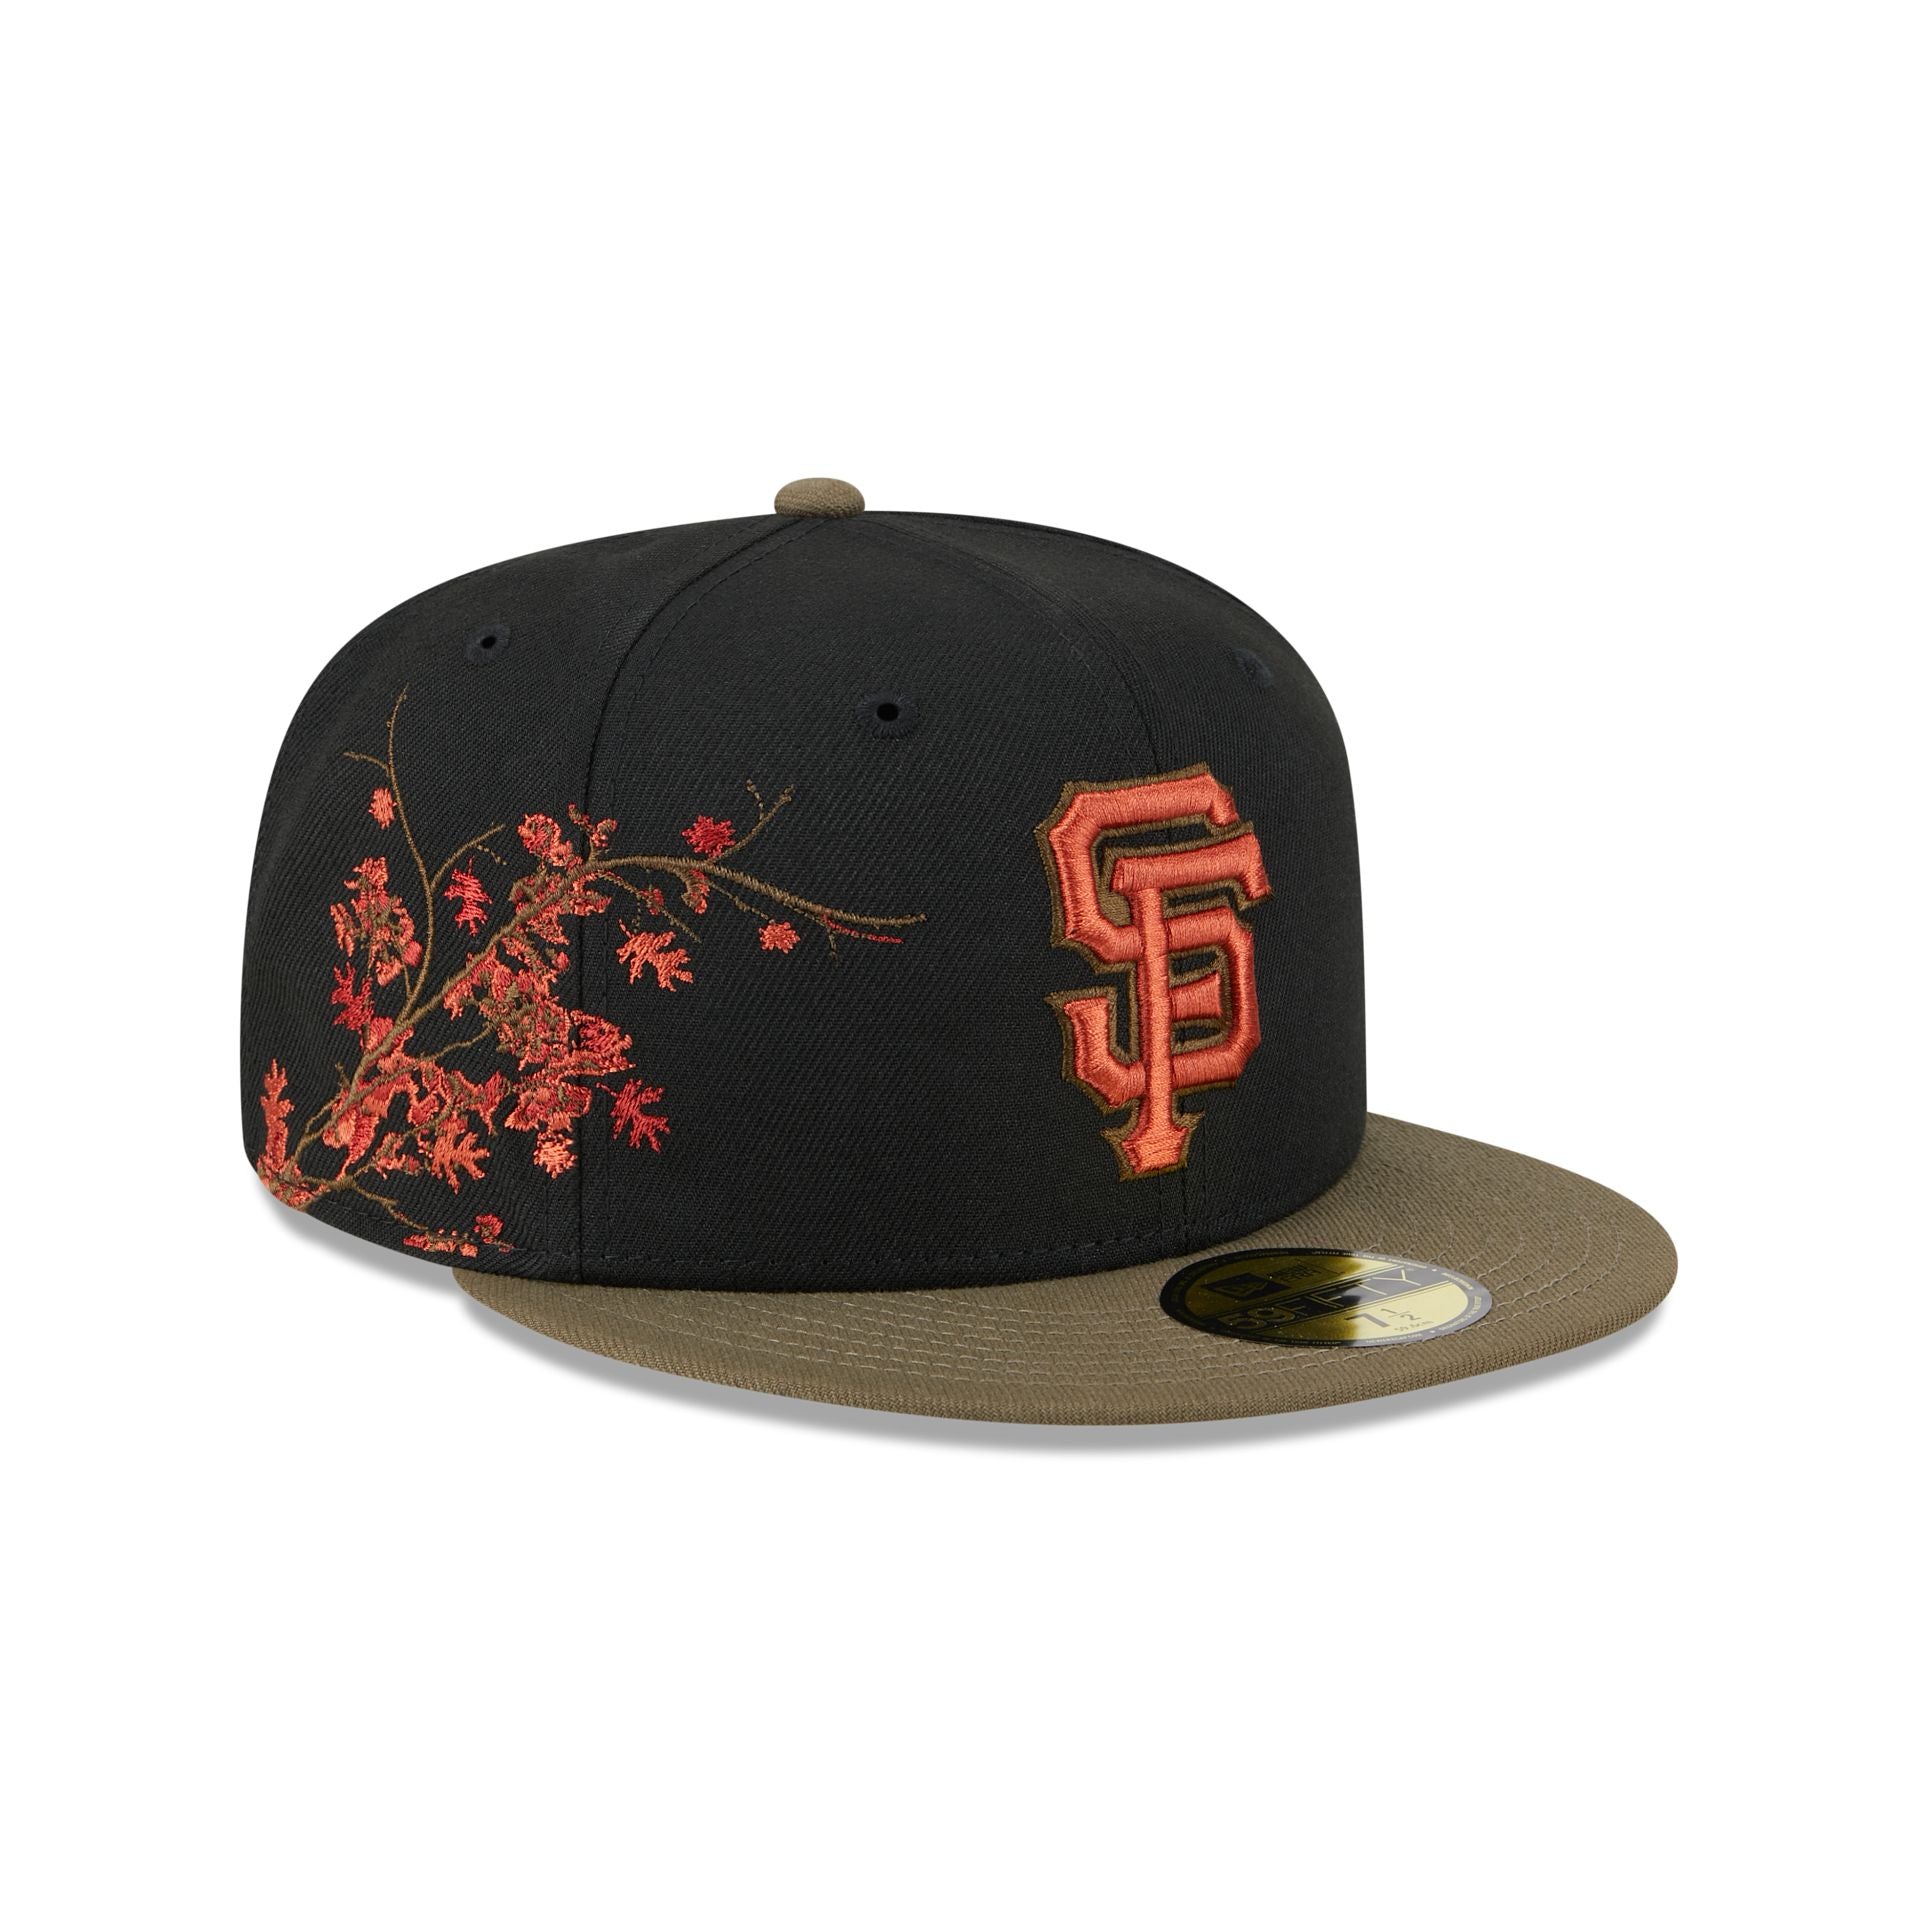 San Francisco Giants Rustic Fall 59FIFTY Fitted Hat, Black - Size: 7, MLB by New Era